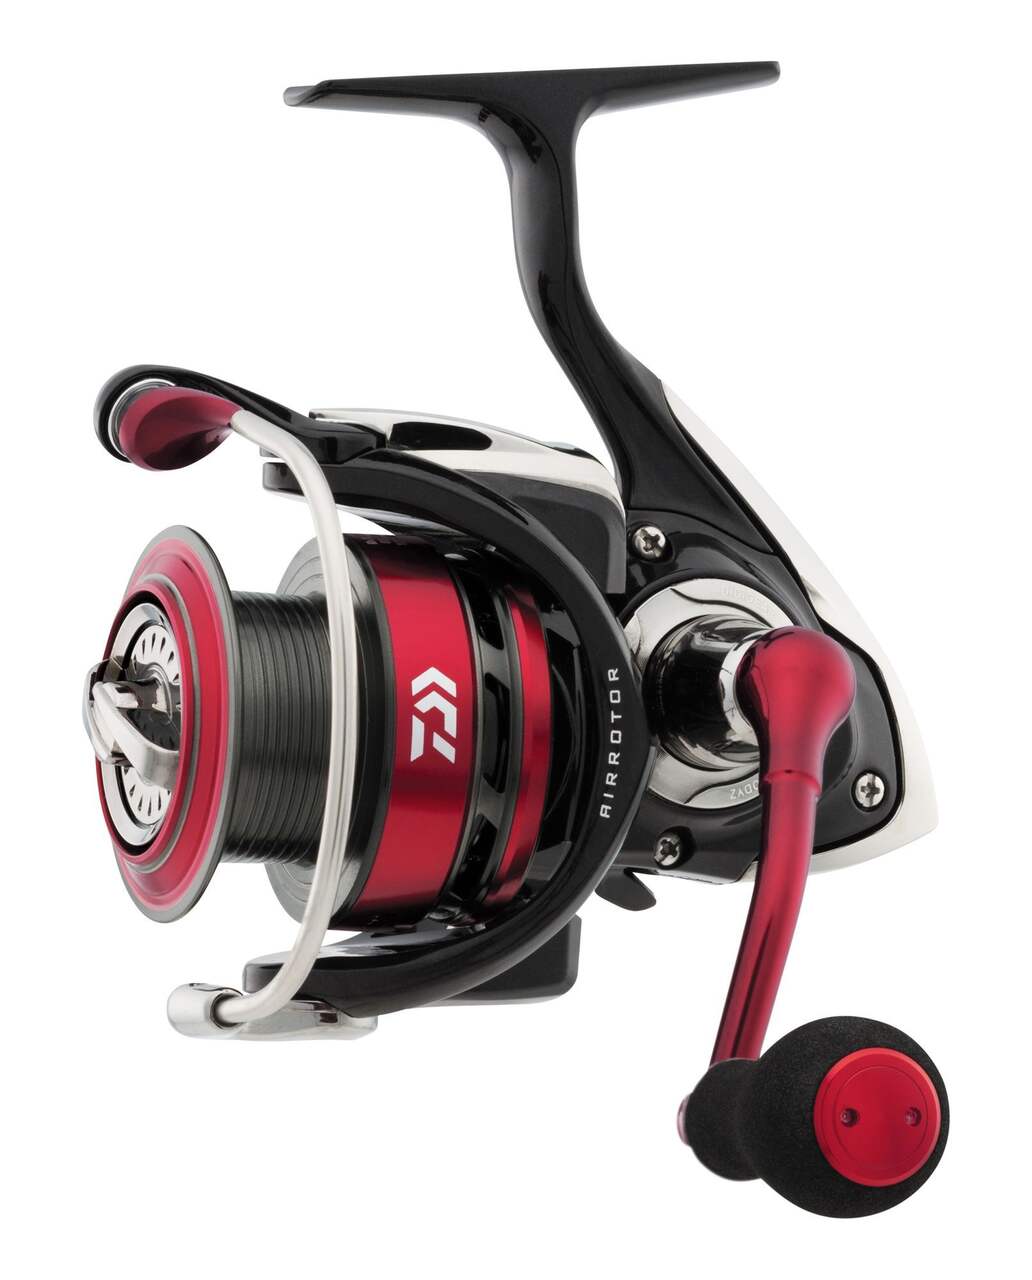 https://media-www.canadiantire.ca/product/playing/fishing/fishing-equipment/1782567/daiwa-fuego-spinning-reel-2500-c5464a6e-fc6d-4f53-be2c-29da3aecf6a1-jpgrendition.jpg?imdensity=1&imwidth=1244&impolicy=mZoom